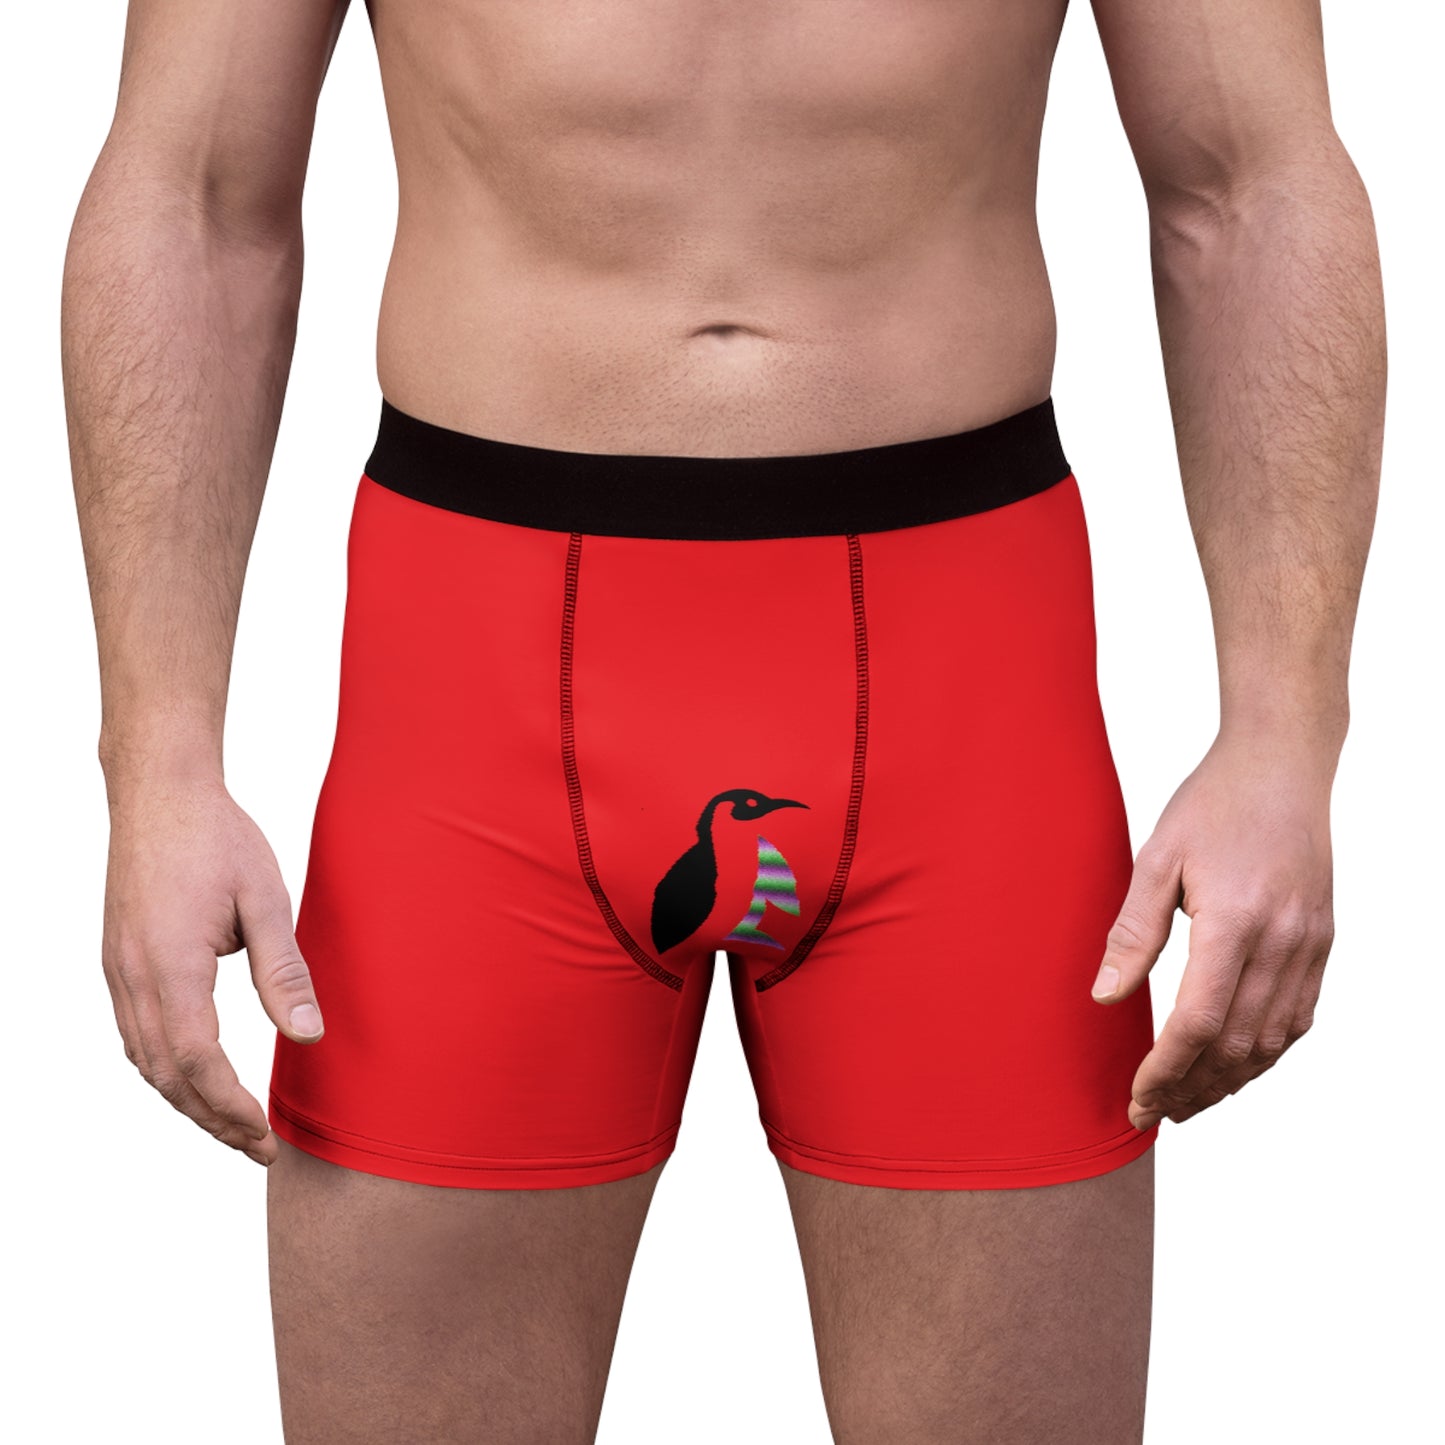 Men's Boxer Briefs: Lost Remember Honor Red